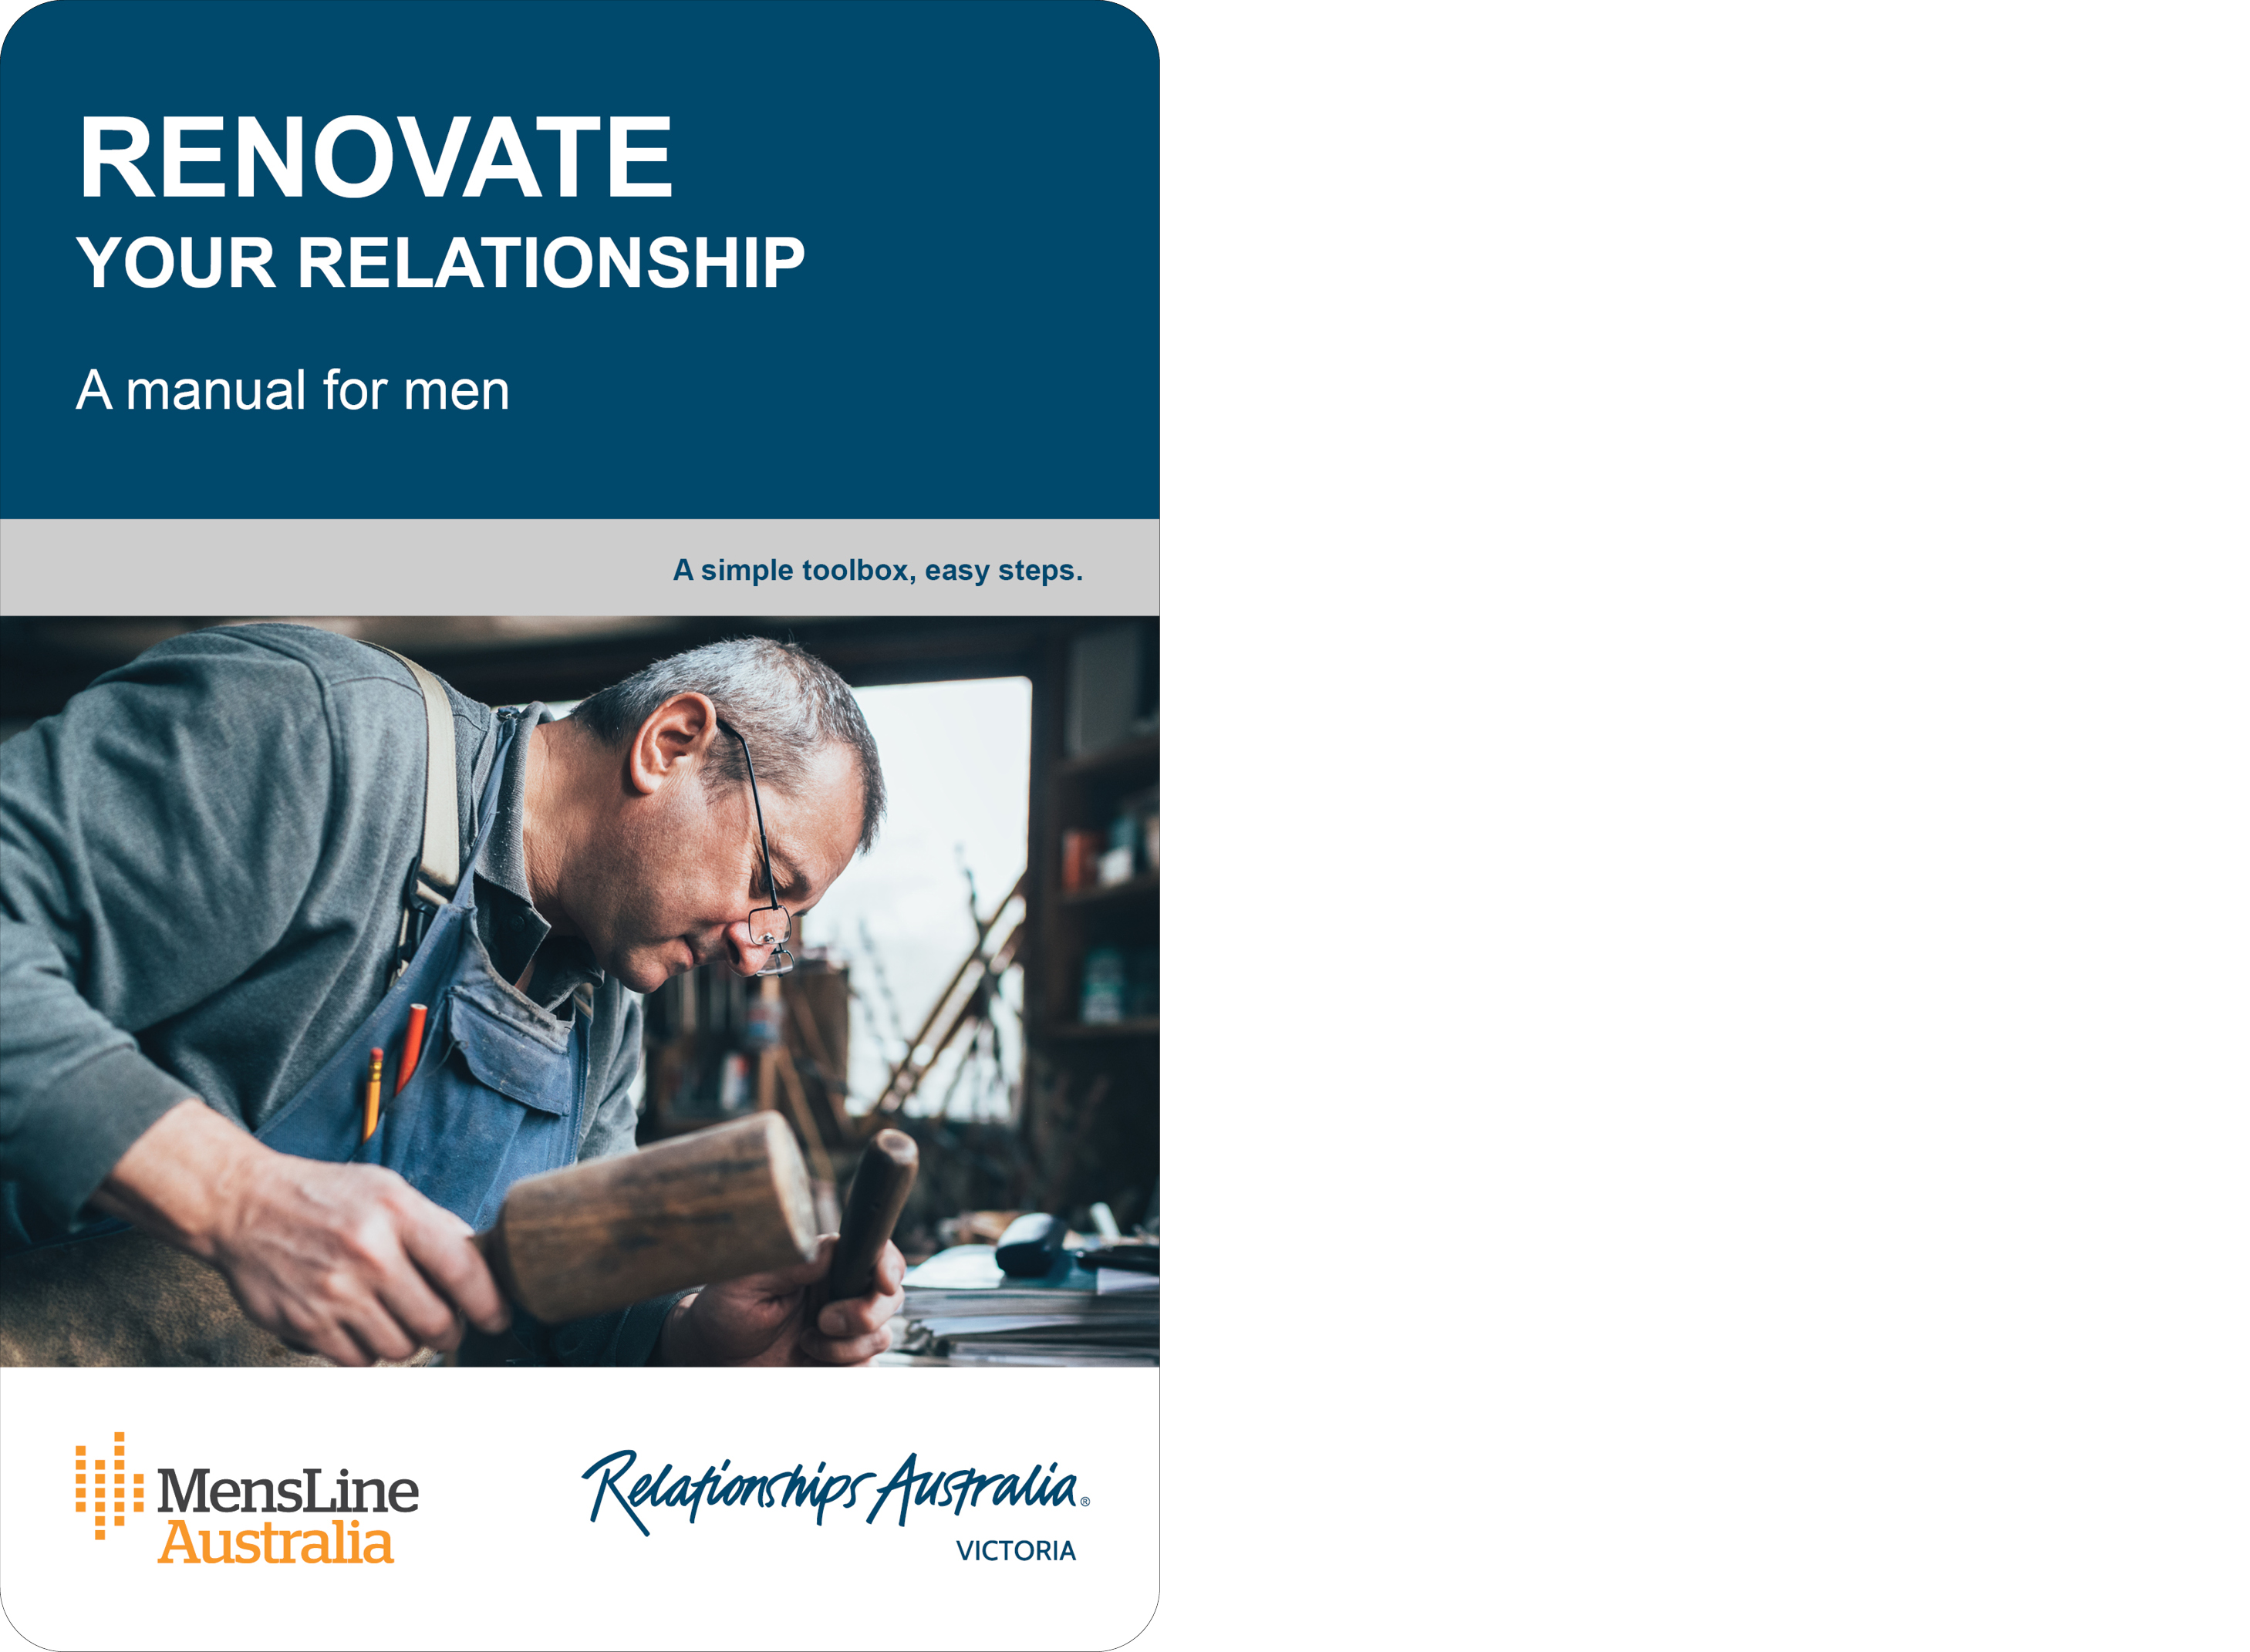 The front cover of the booklet which shows the text 'Renovate your relationship - a manual for men', a man performing woodwork, and the Relationships Australia logo